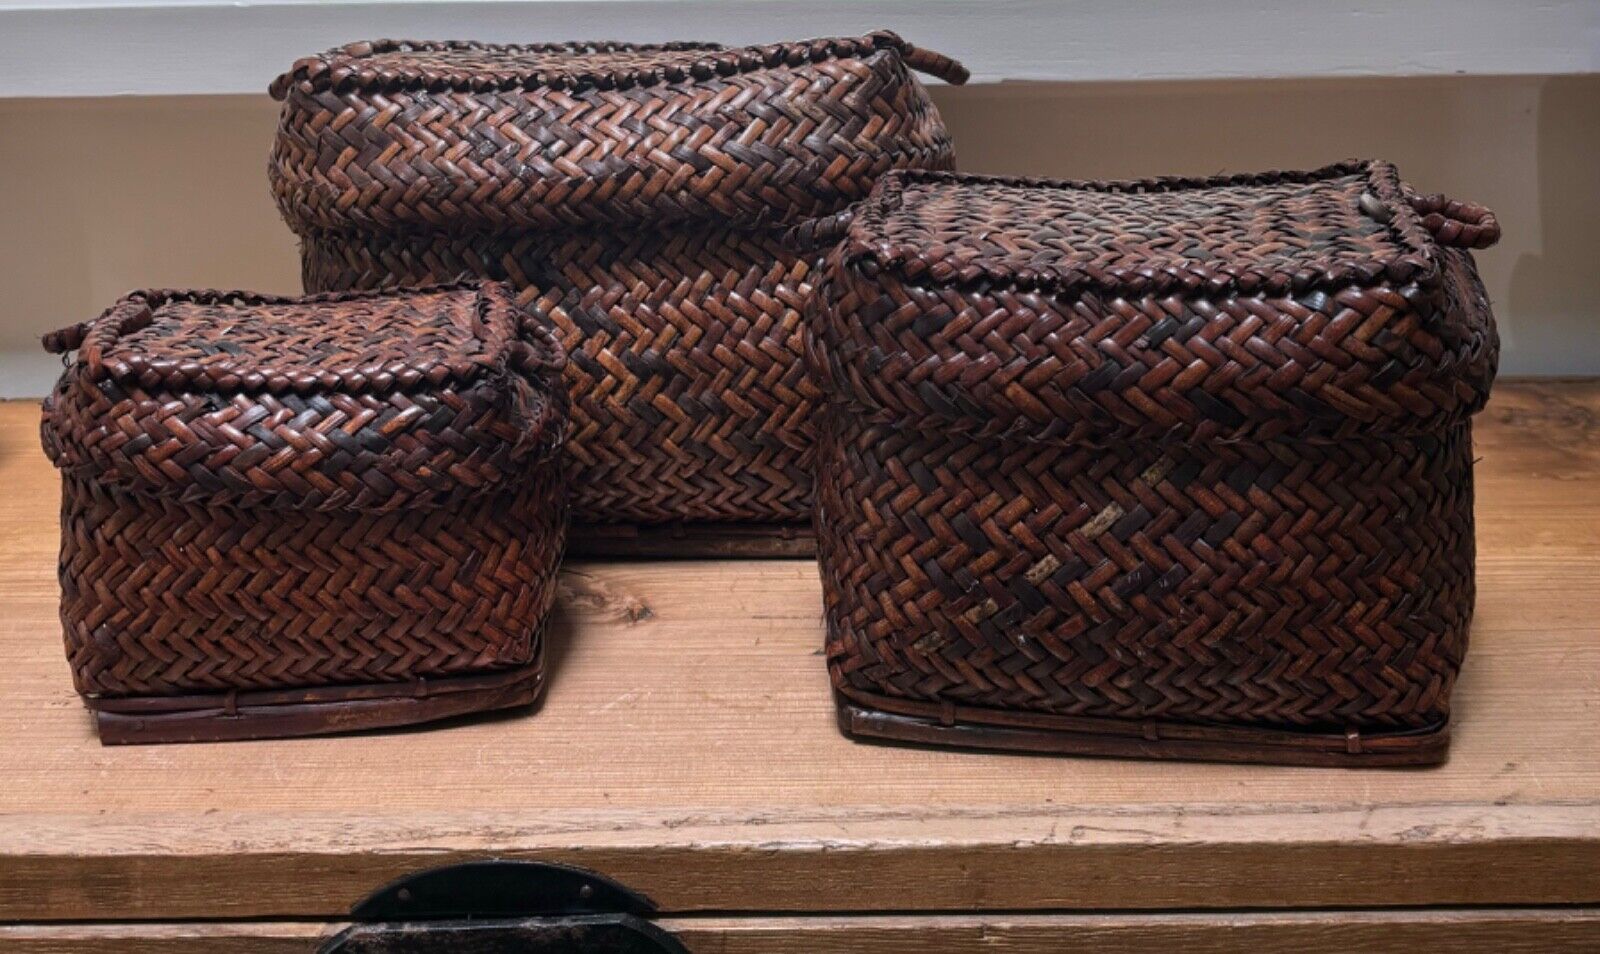 3 ANTIQUE IFUGAO BASKETS WITH HANDLES